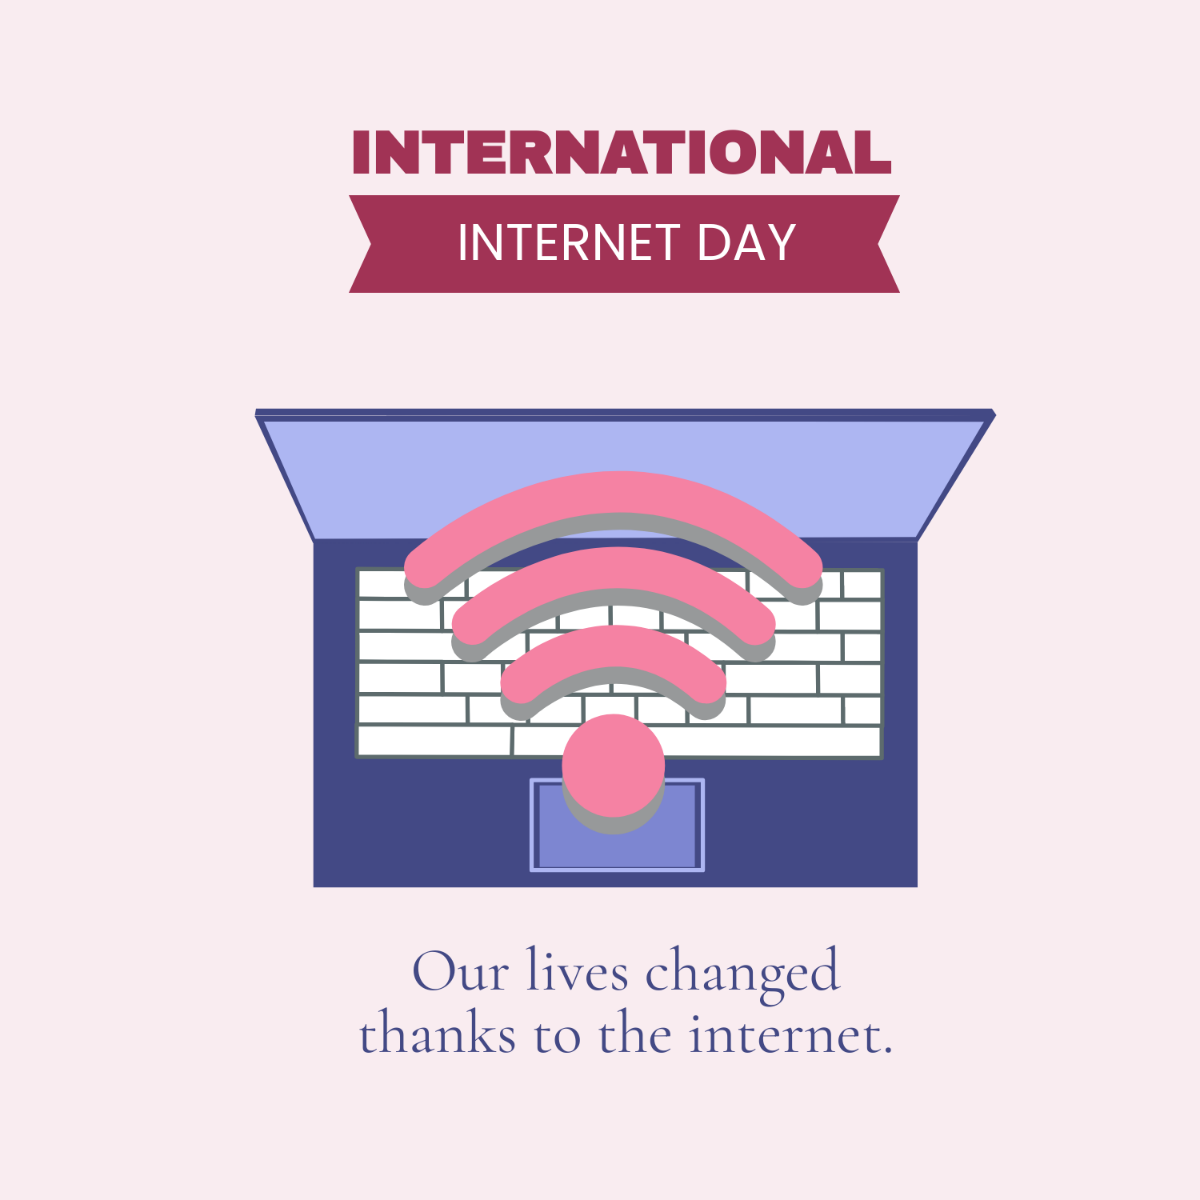 Free International Internet Day Poster Vector Template